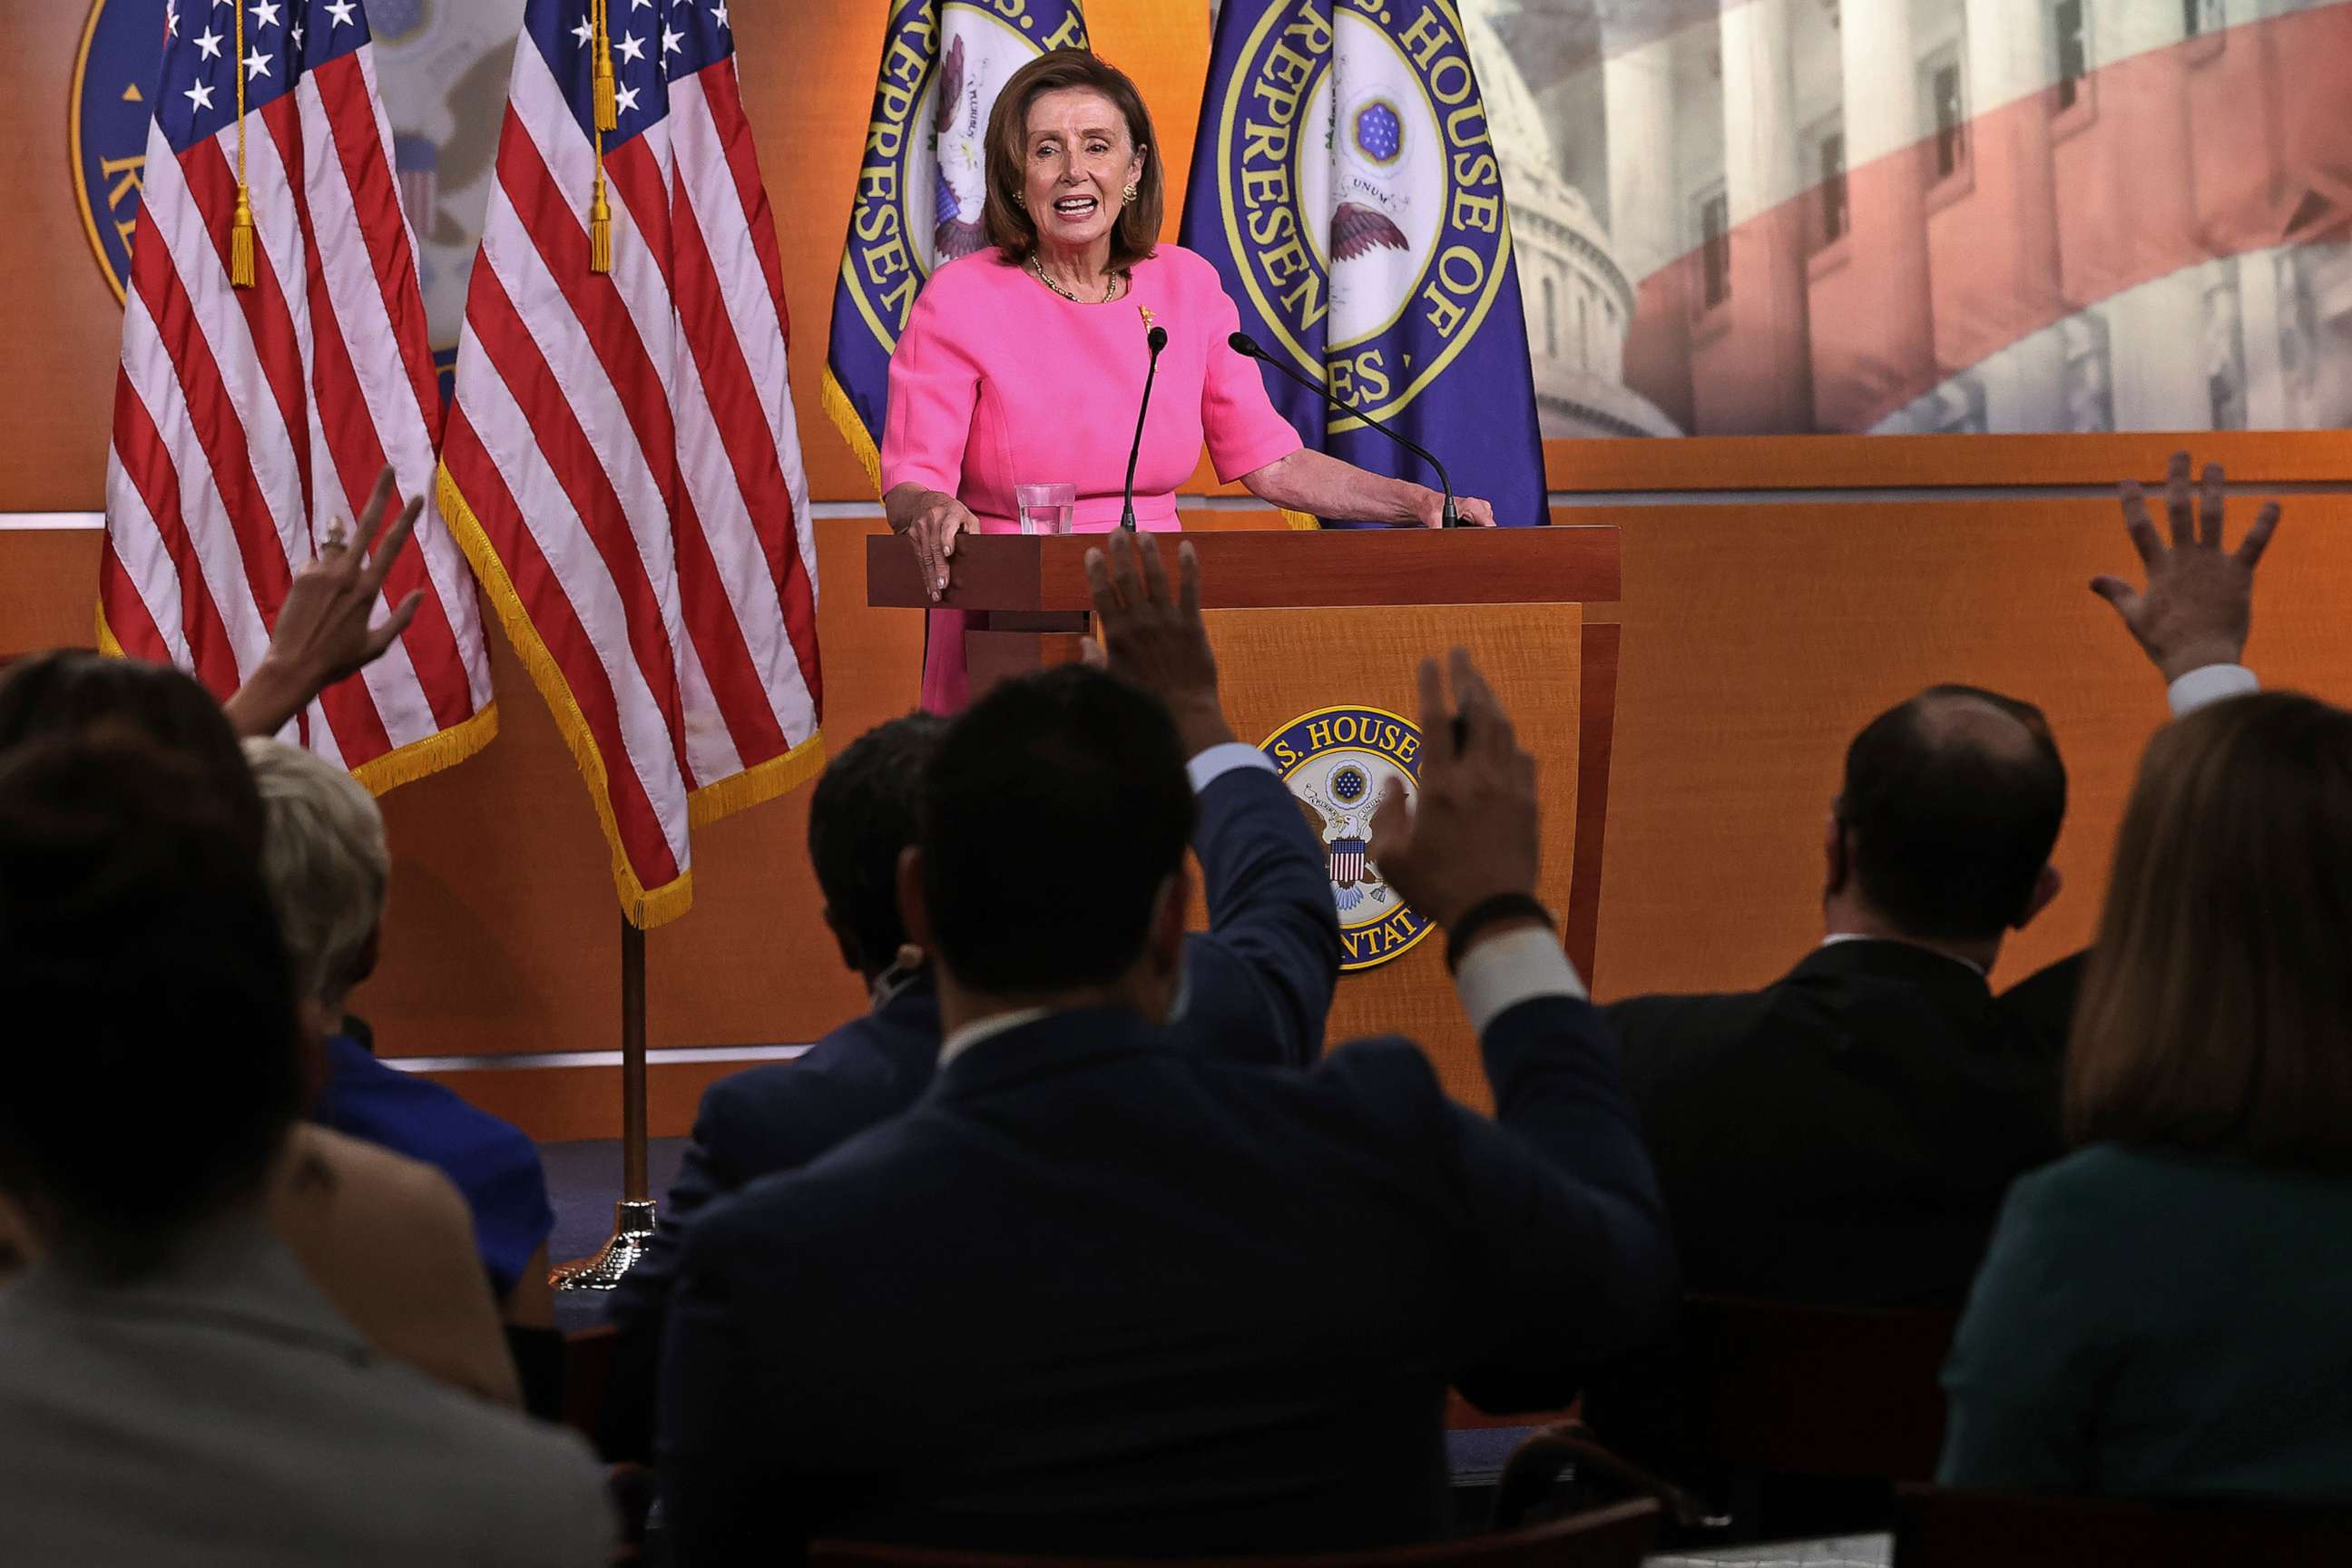 PHOTO: Speaker of the House Nancy Pelosi holds a news conference at the U.S. Capitol on Sept. 23, 2021 in Washington, D.C. Pelosi, Charles Schumer and other Democrats met with President Biden to hammer out a deal on infrastructure and budget legislation. 